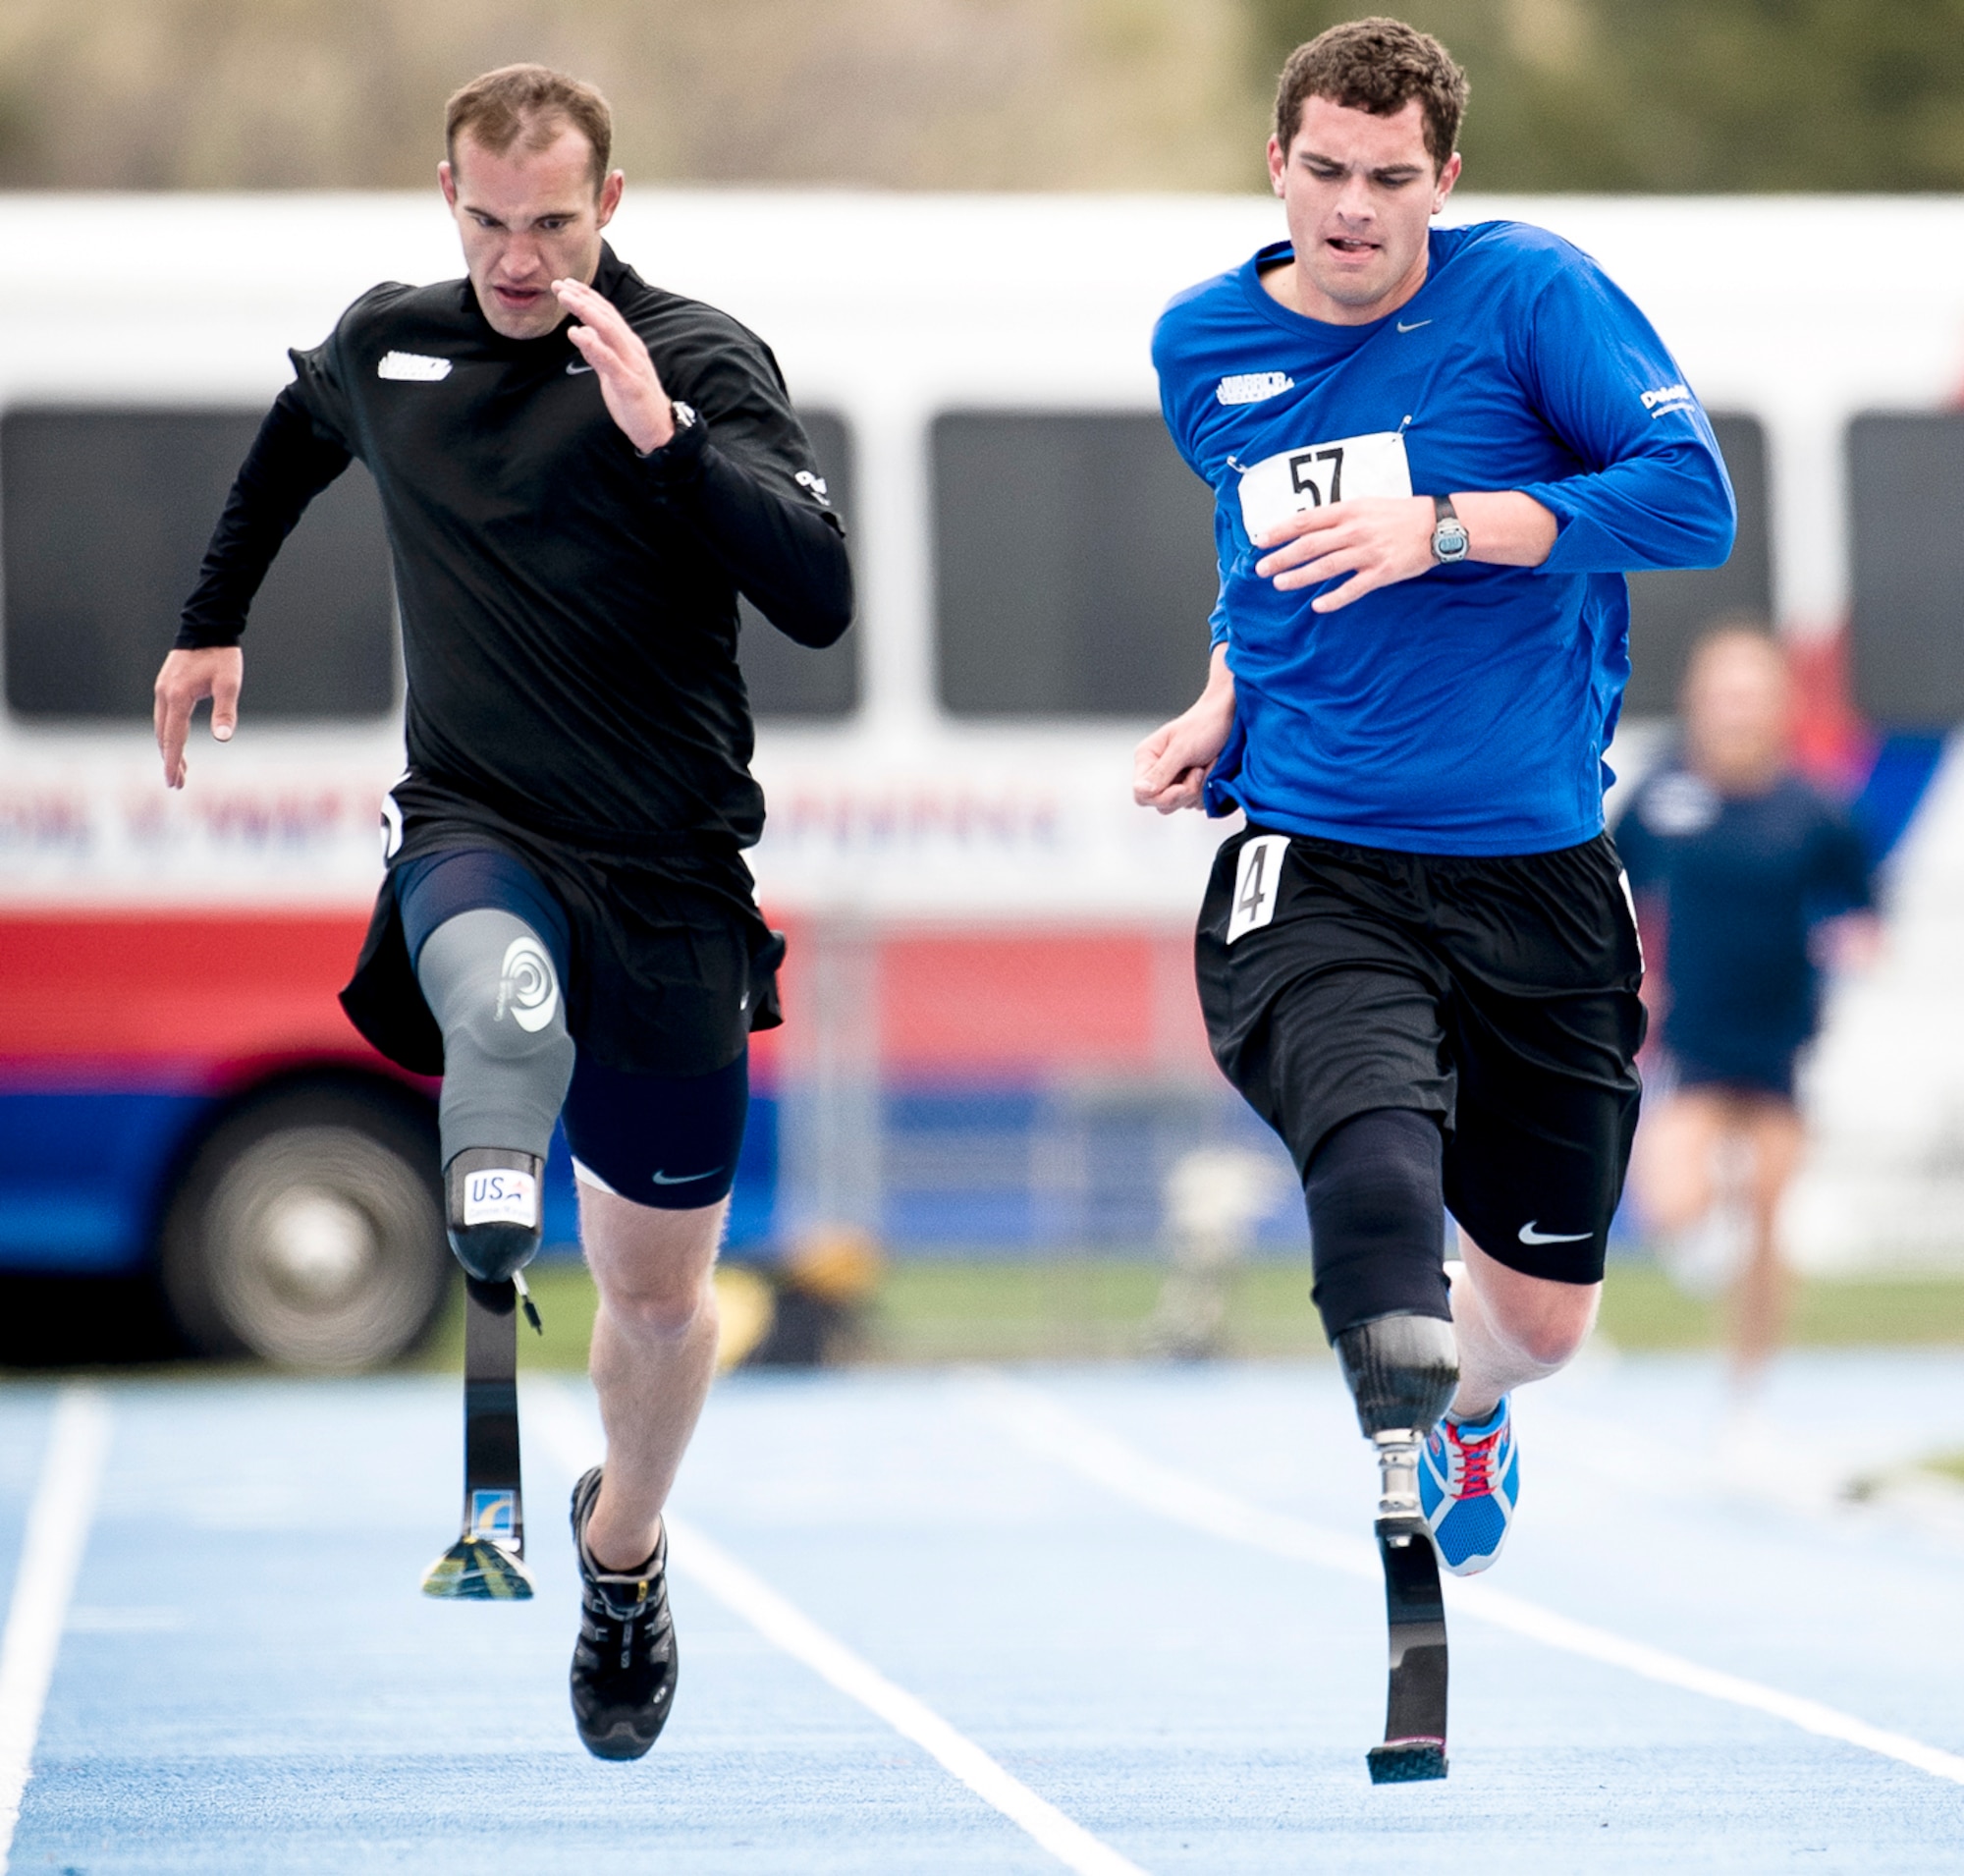 1st Lt. Ryan McGuire (right) sprints the last leg of the 1,500m dash to take fourth place during the Warrior Games May 14, 2010, in Colorado Springs, Colo. (U.S. Air Force photo/Tech. Sgt. Samuel Bendet)